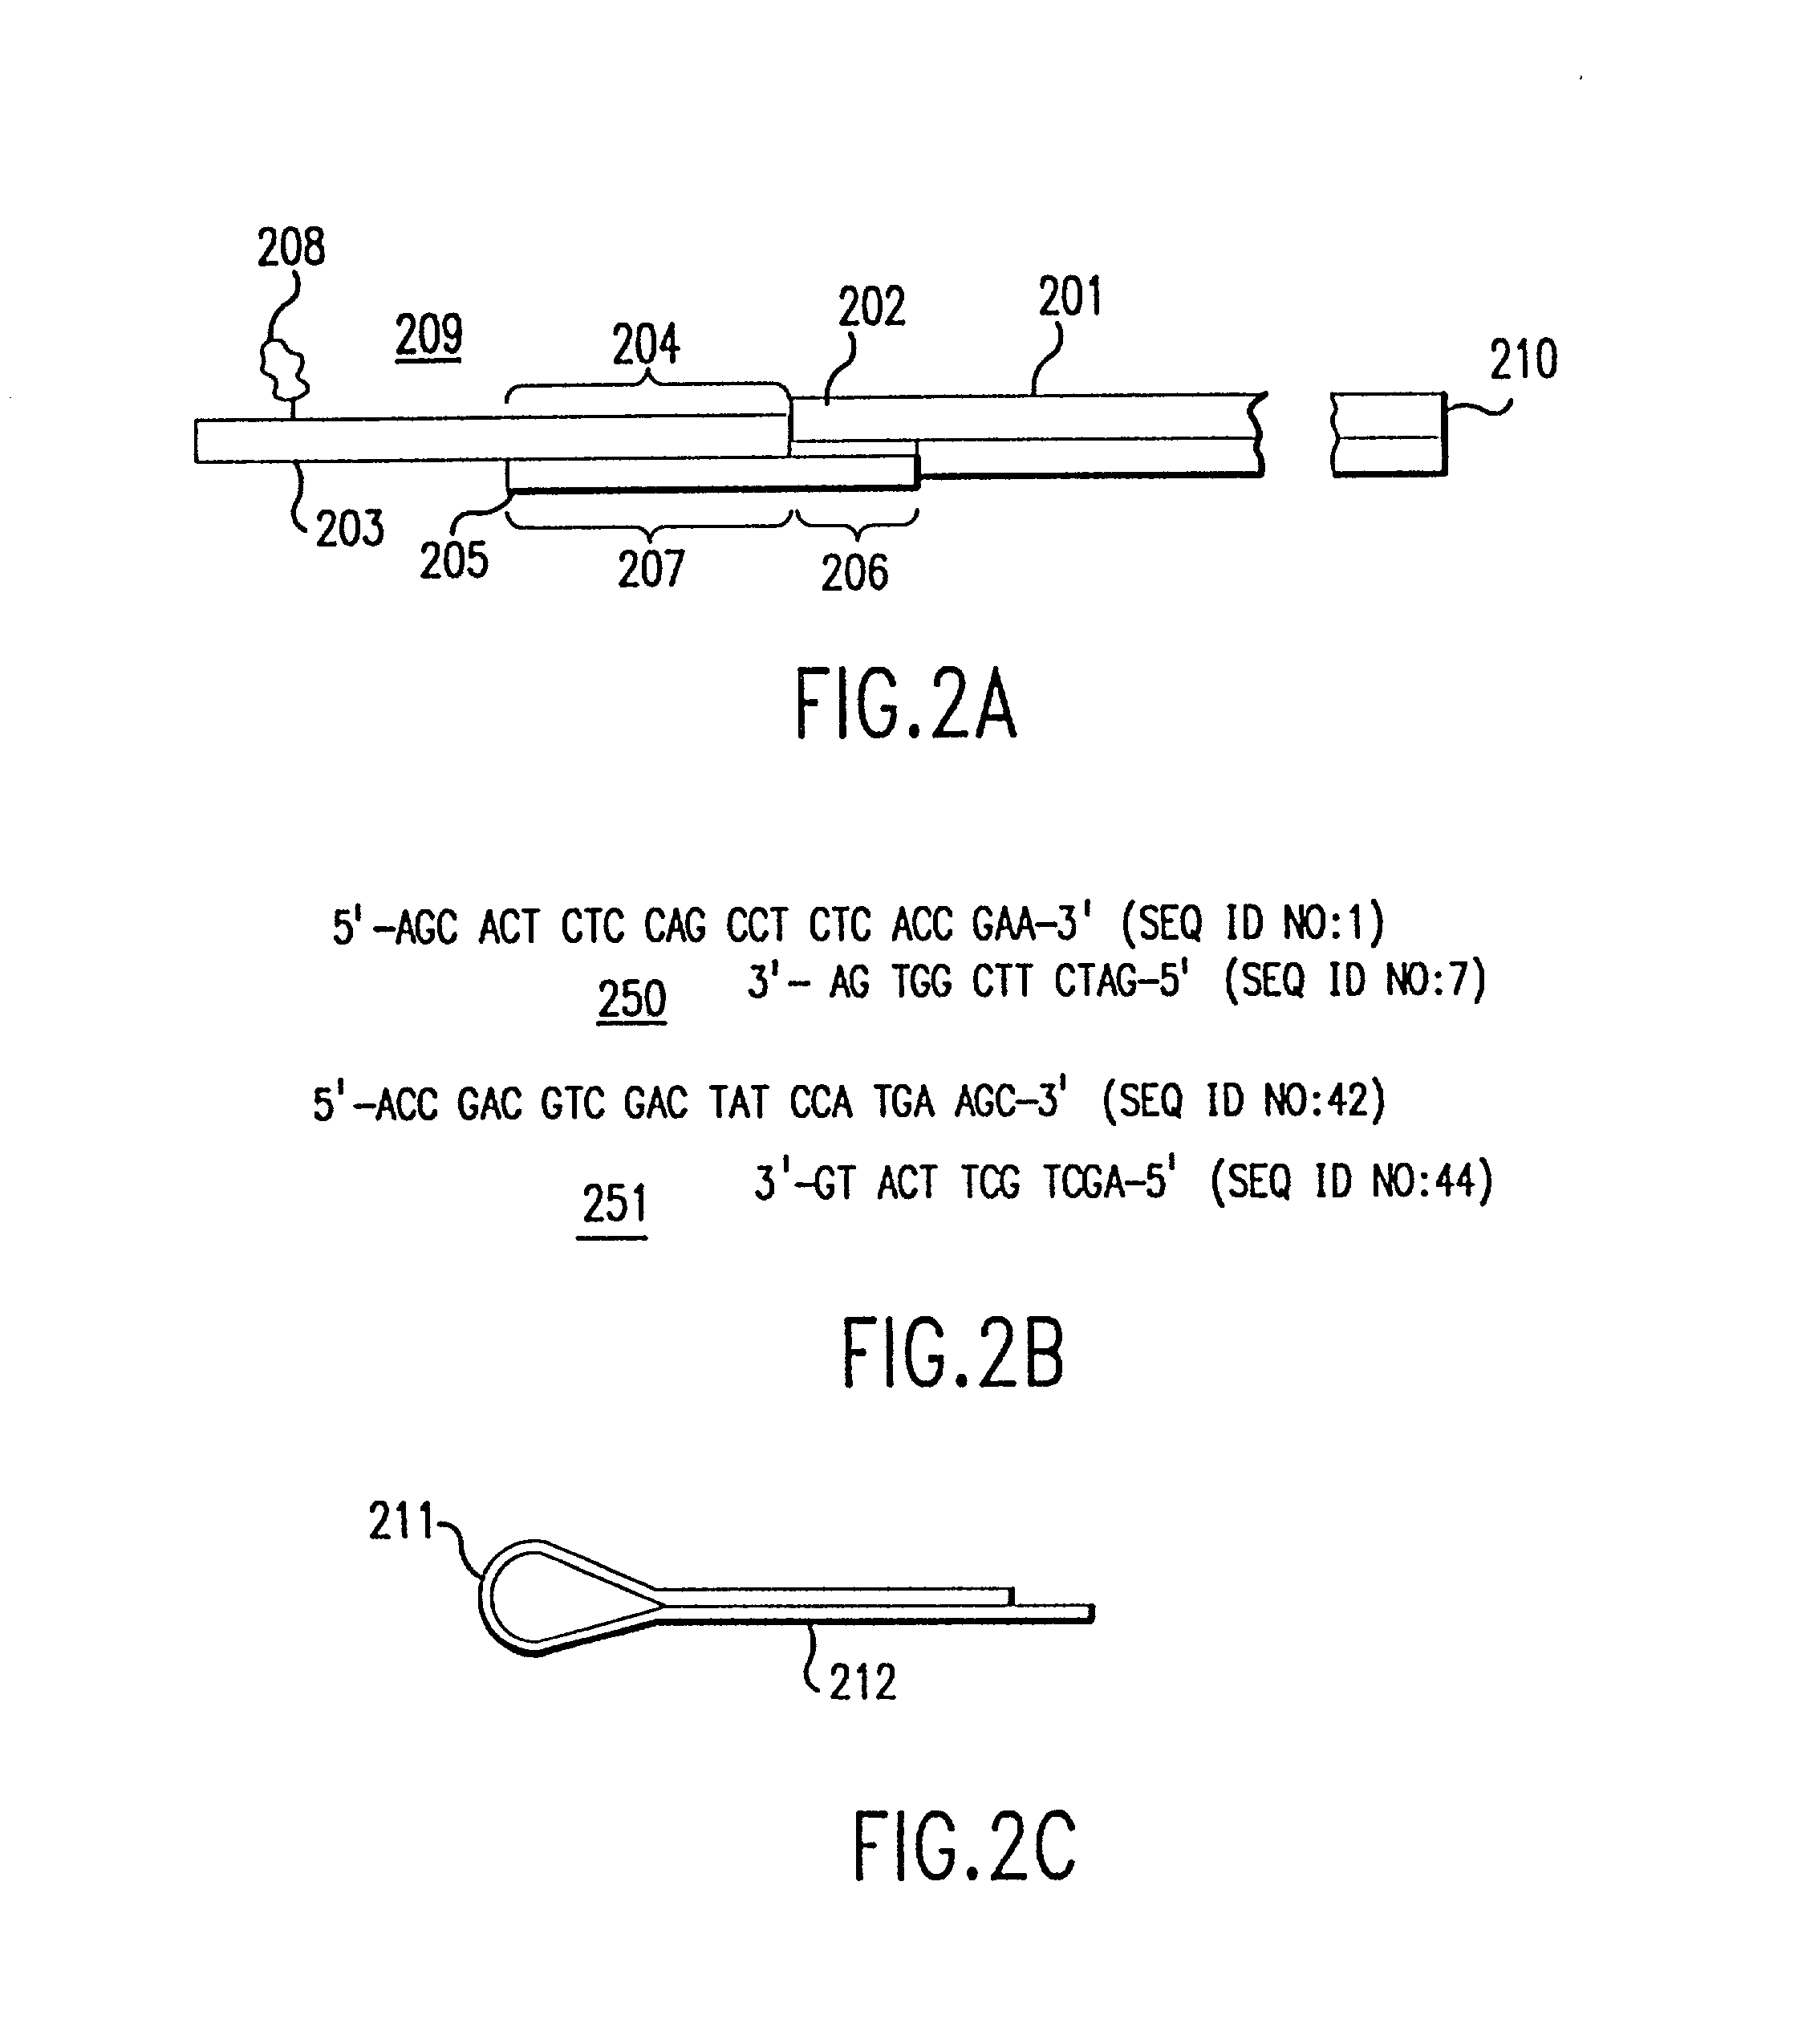 Method and apparatus for identifying, classifying, or quantifying DNA sequences in a sample without sequencing